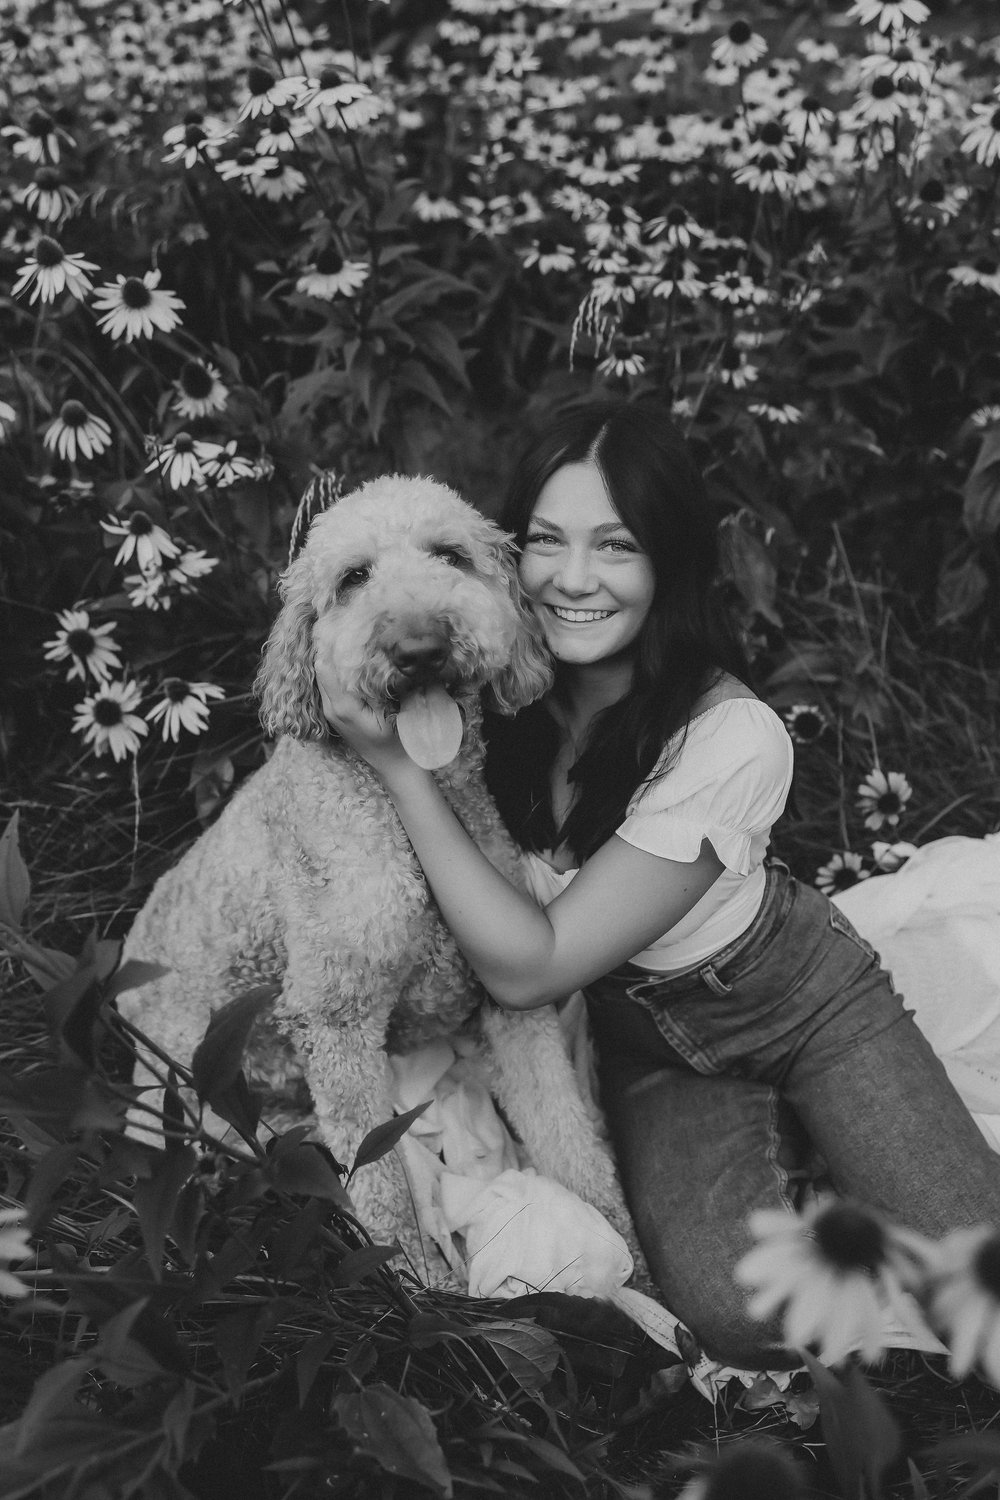  olivia and her dog smile in a grassy flowery area  